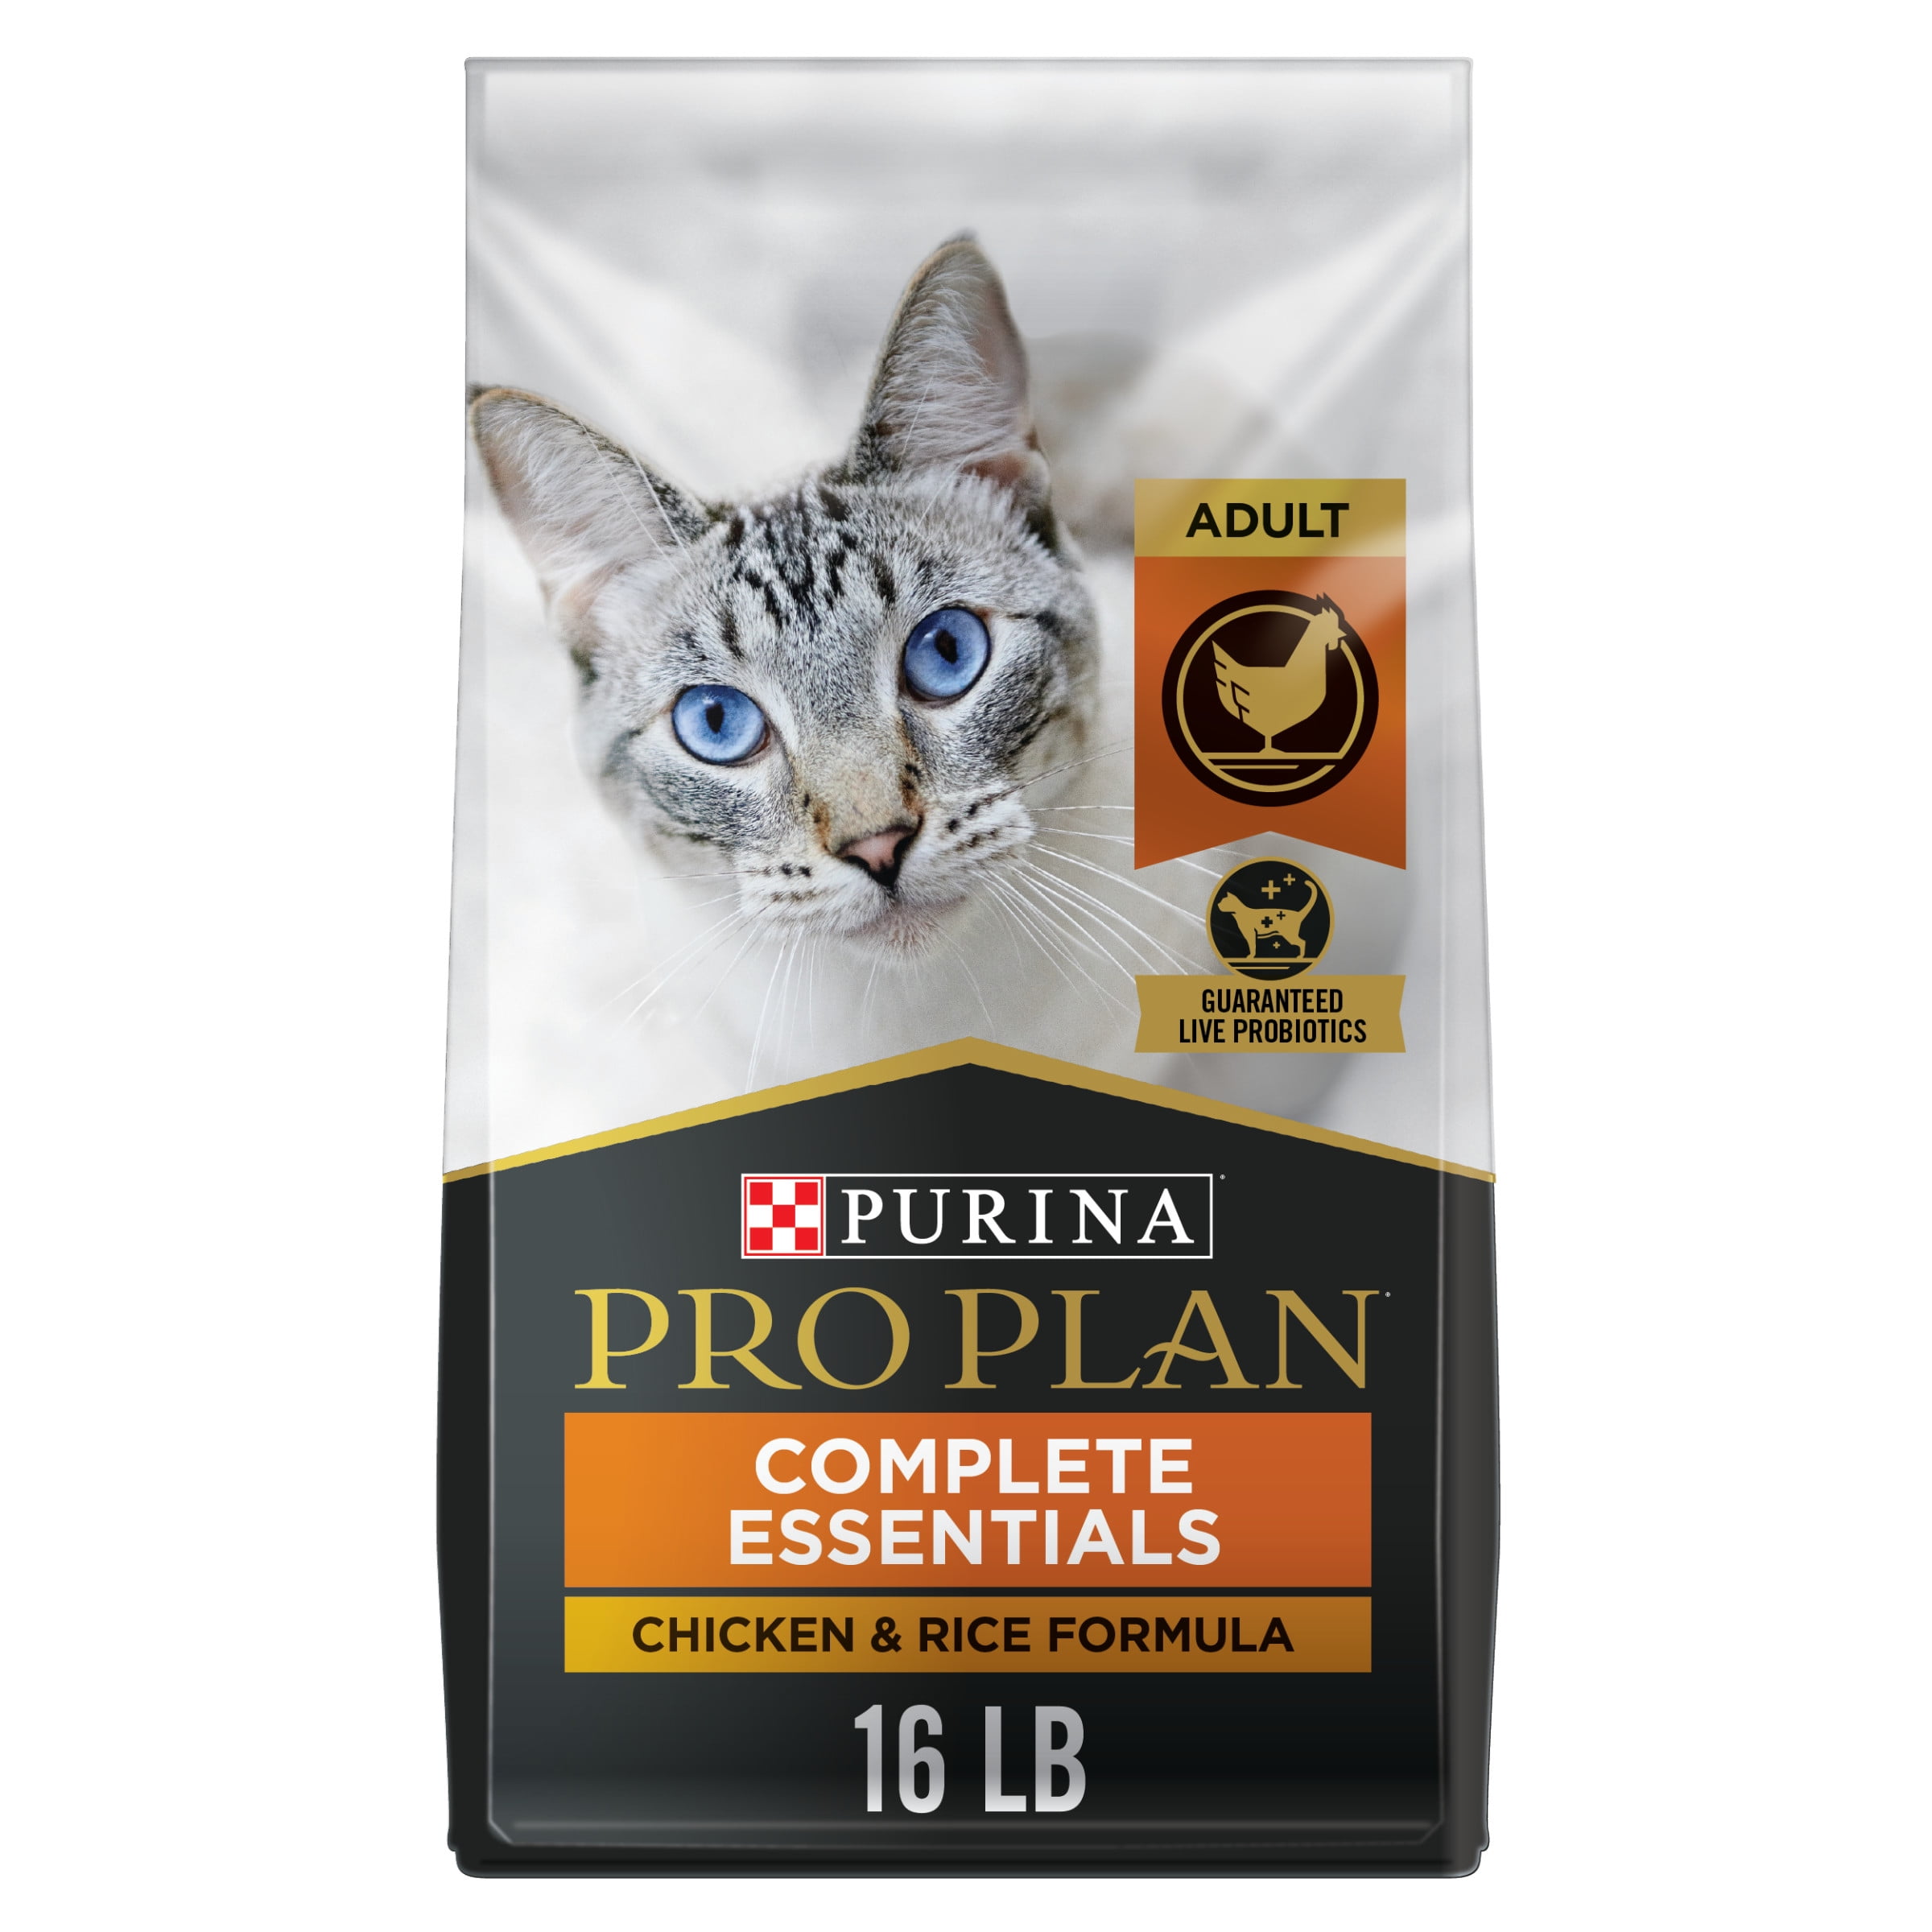 purina-pro-plan-high-protein-cat-food-with-probiotics-for-cats-chicken